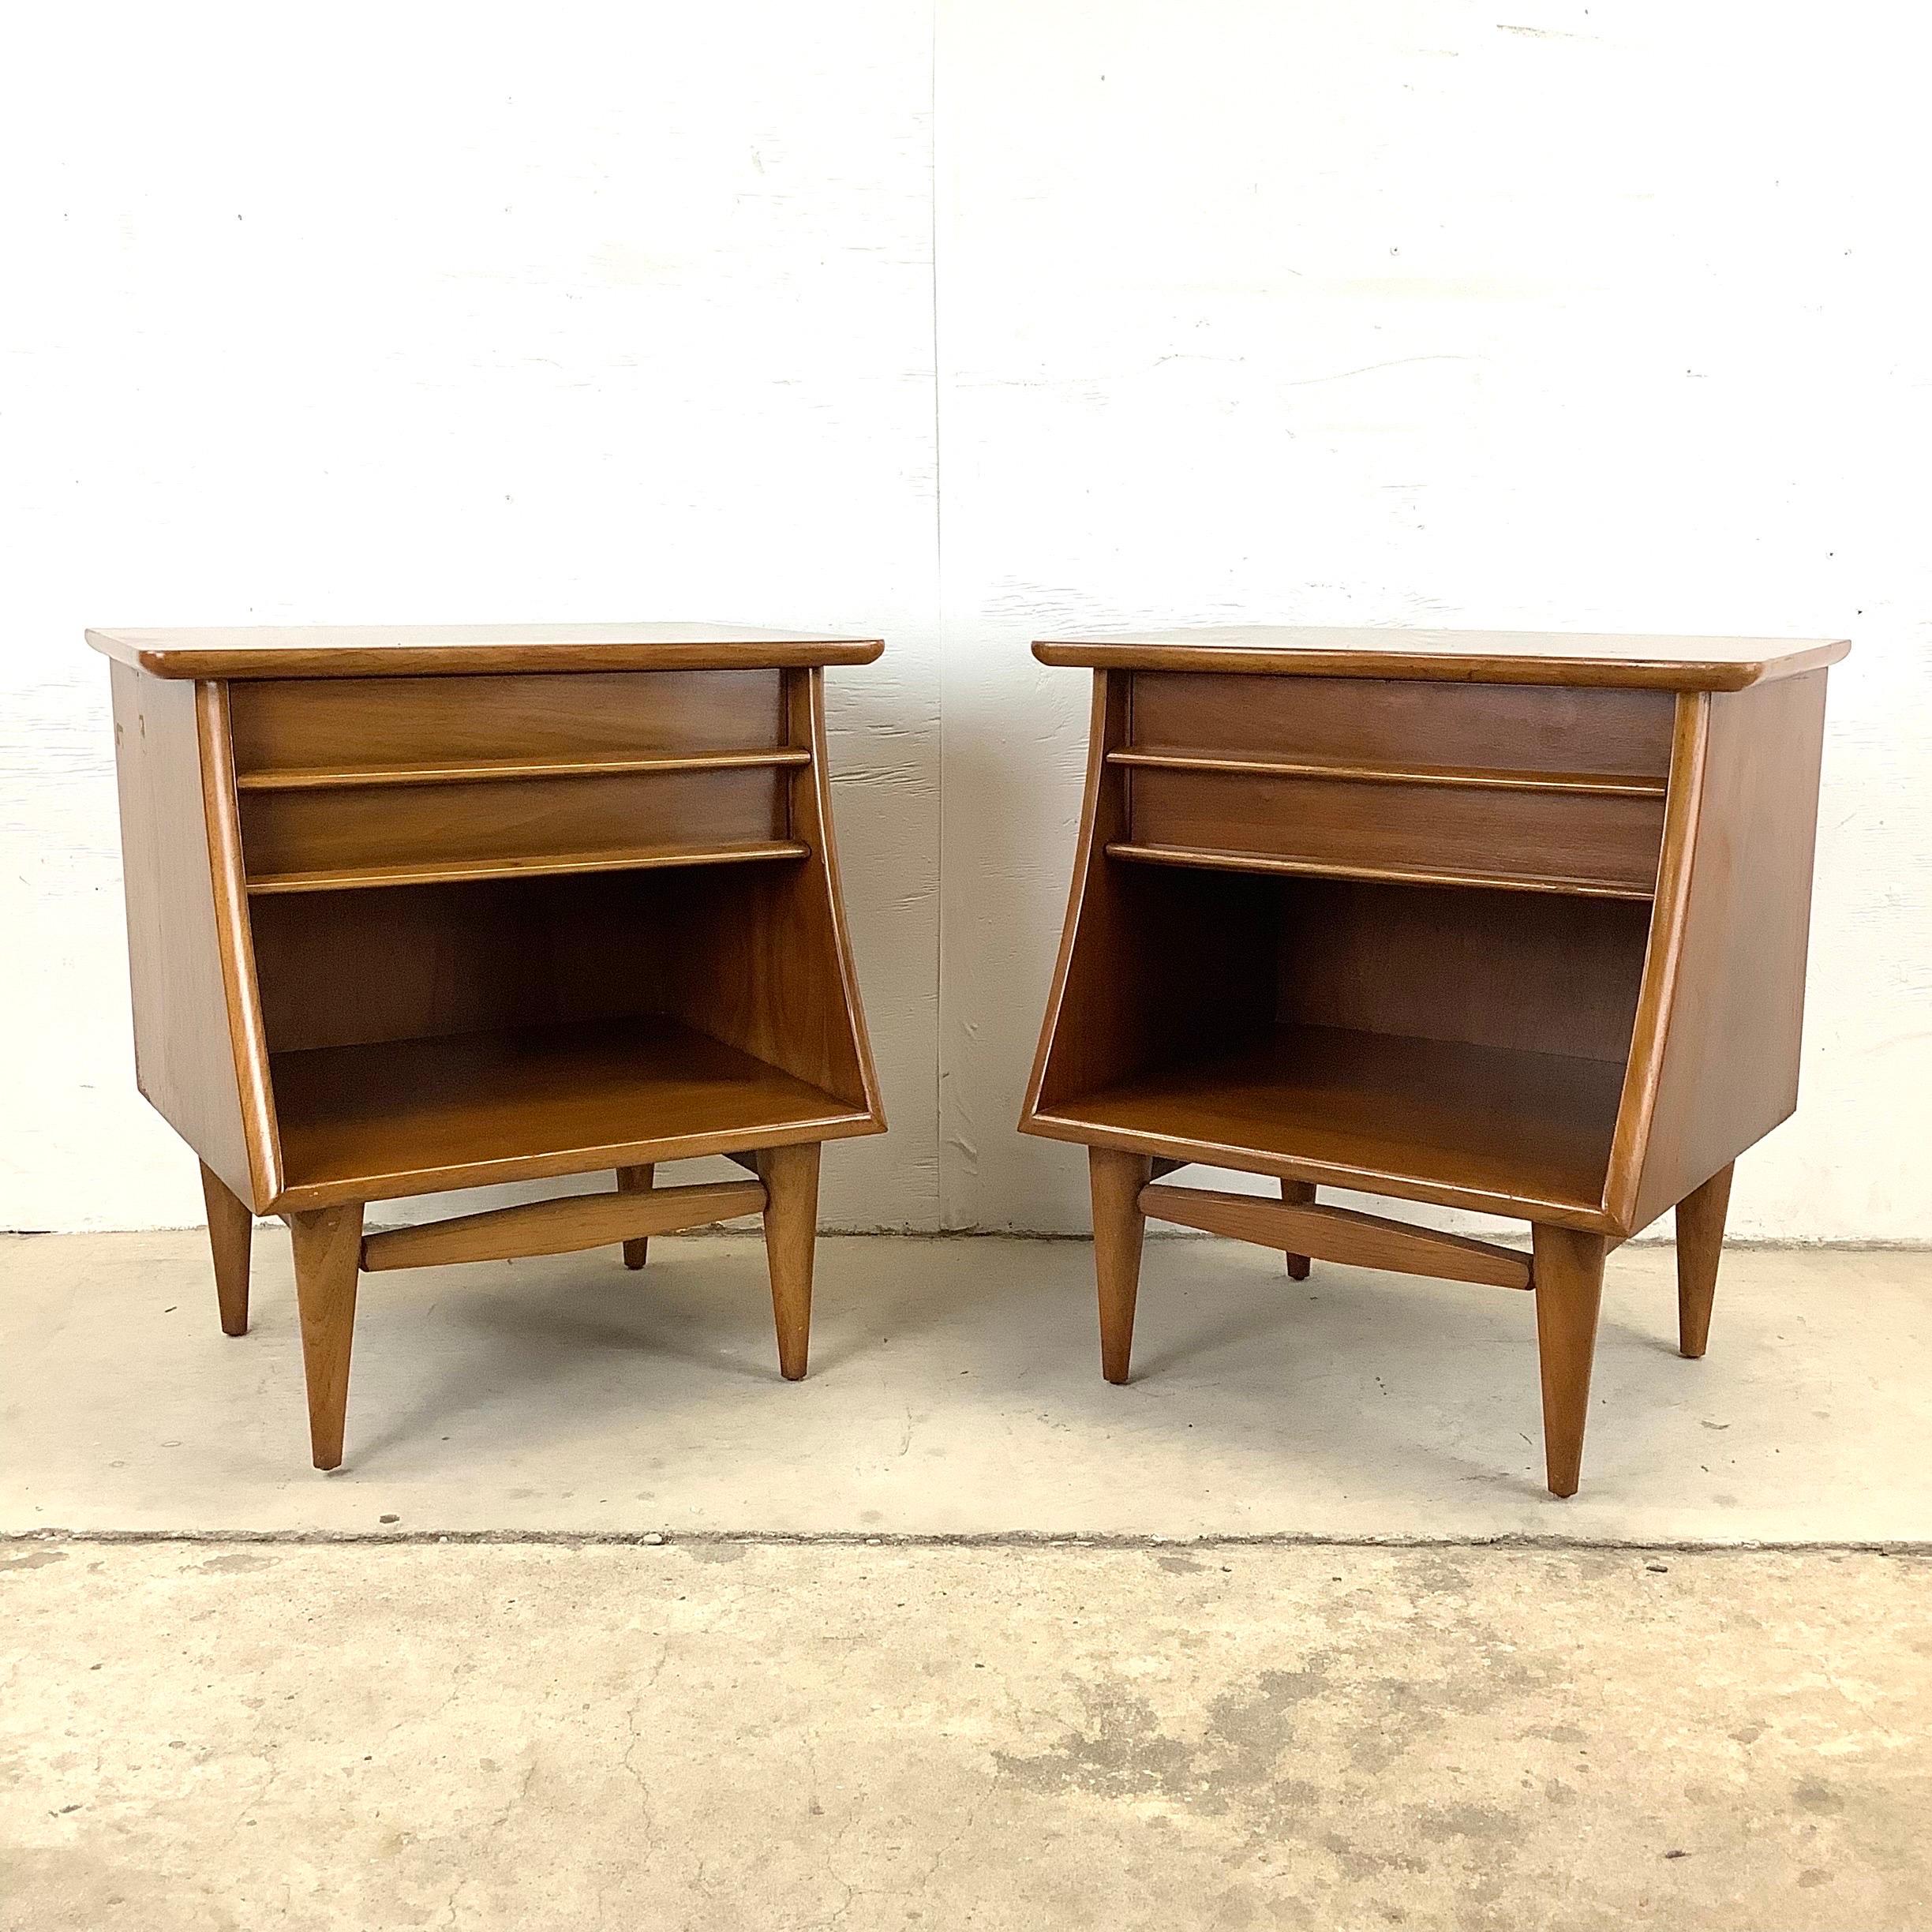 The simple yet stylish mid-century design of these matching walnut nightstands uses clean modern lines, sculptural wooden drawer pulls, and a vintage walnut finish to make these the perfect addition to any interior. From the Kent Coffey “Foreteller”